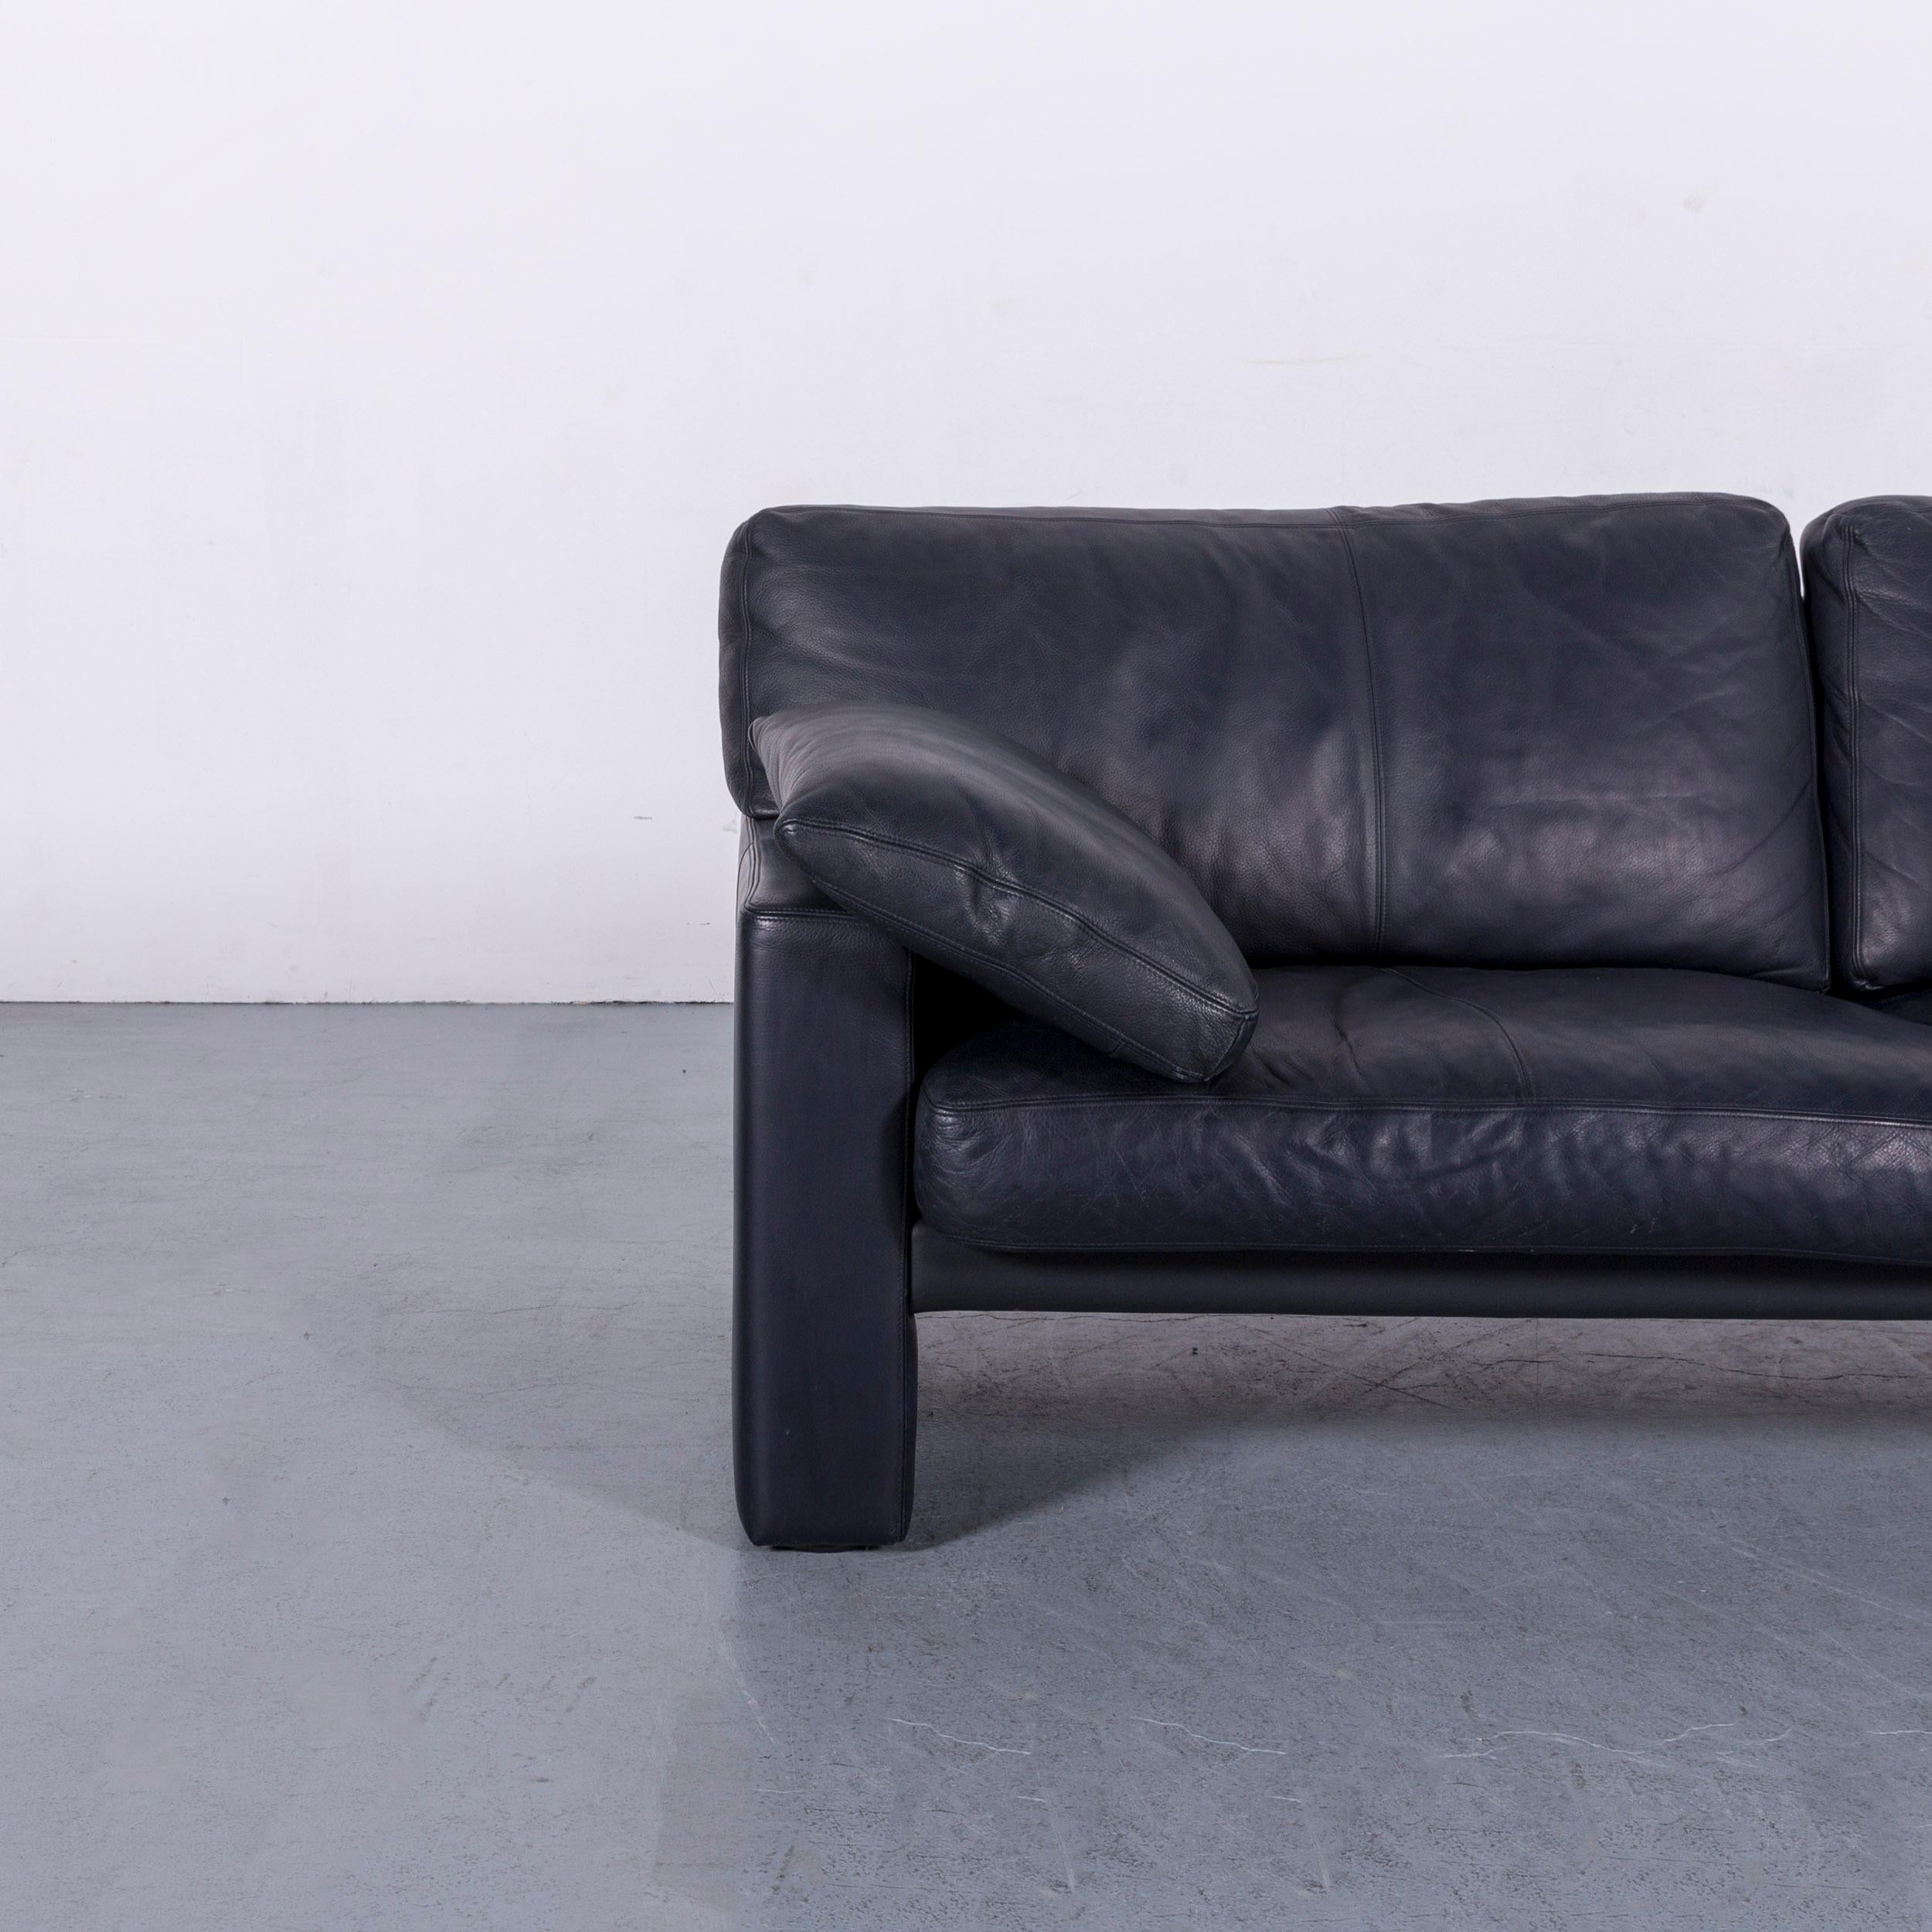 We bring to you an Erpo CL 300 leather sofa deep-blue three-seat couch.

























